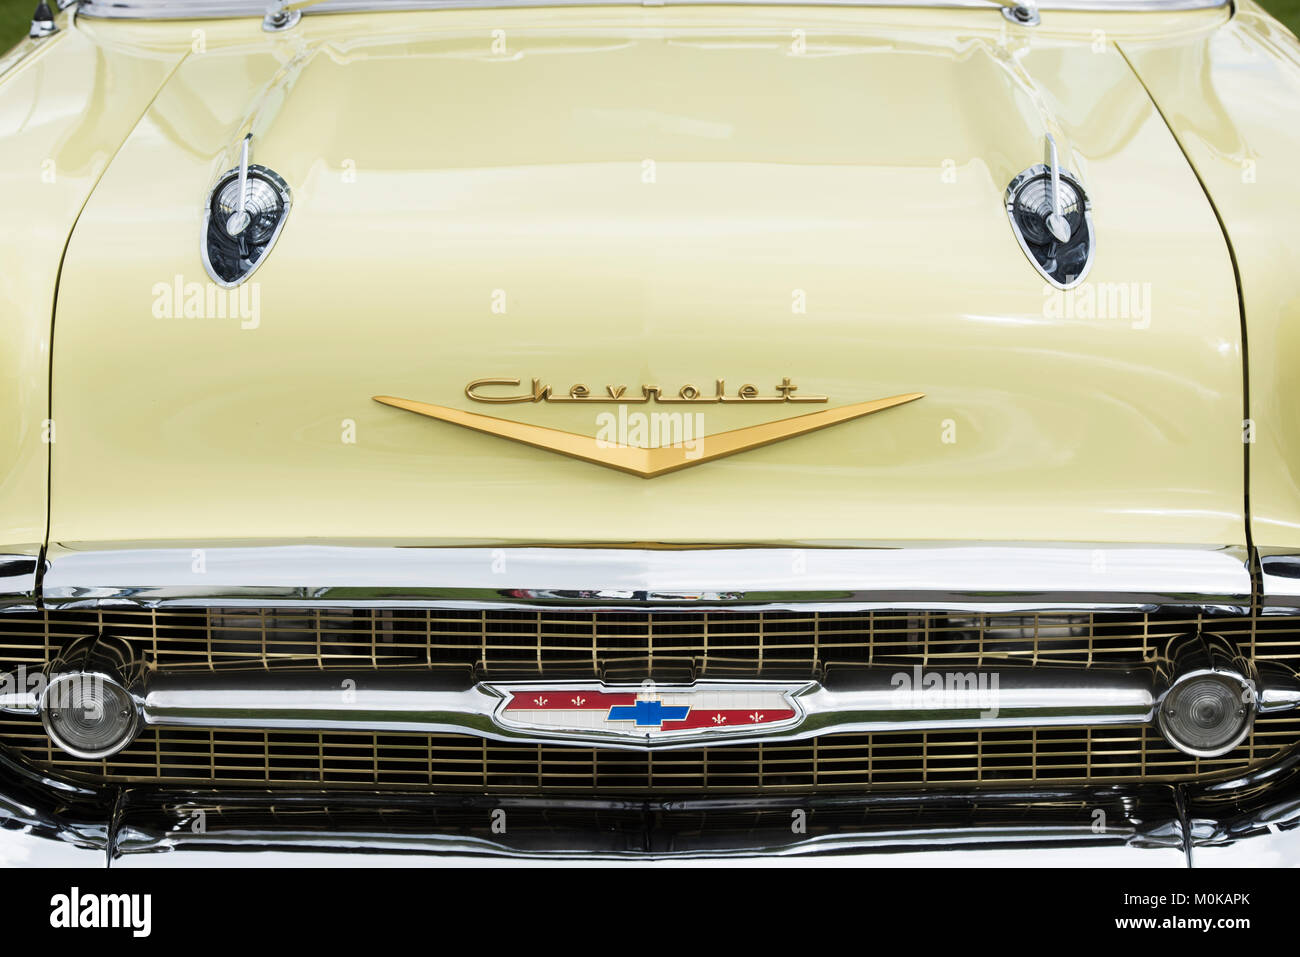 1957 Chevrolet Bel Air. Chevy. Classic American car Stock Photo